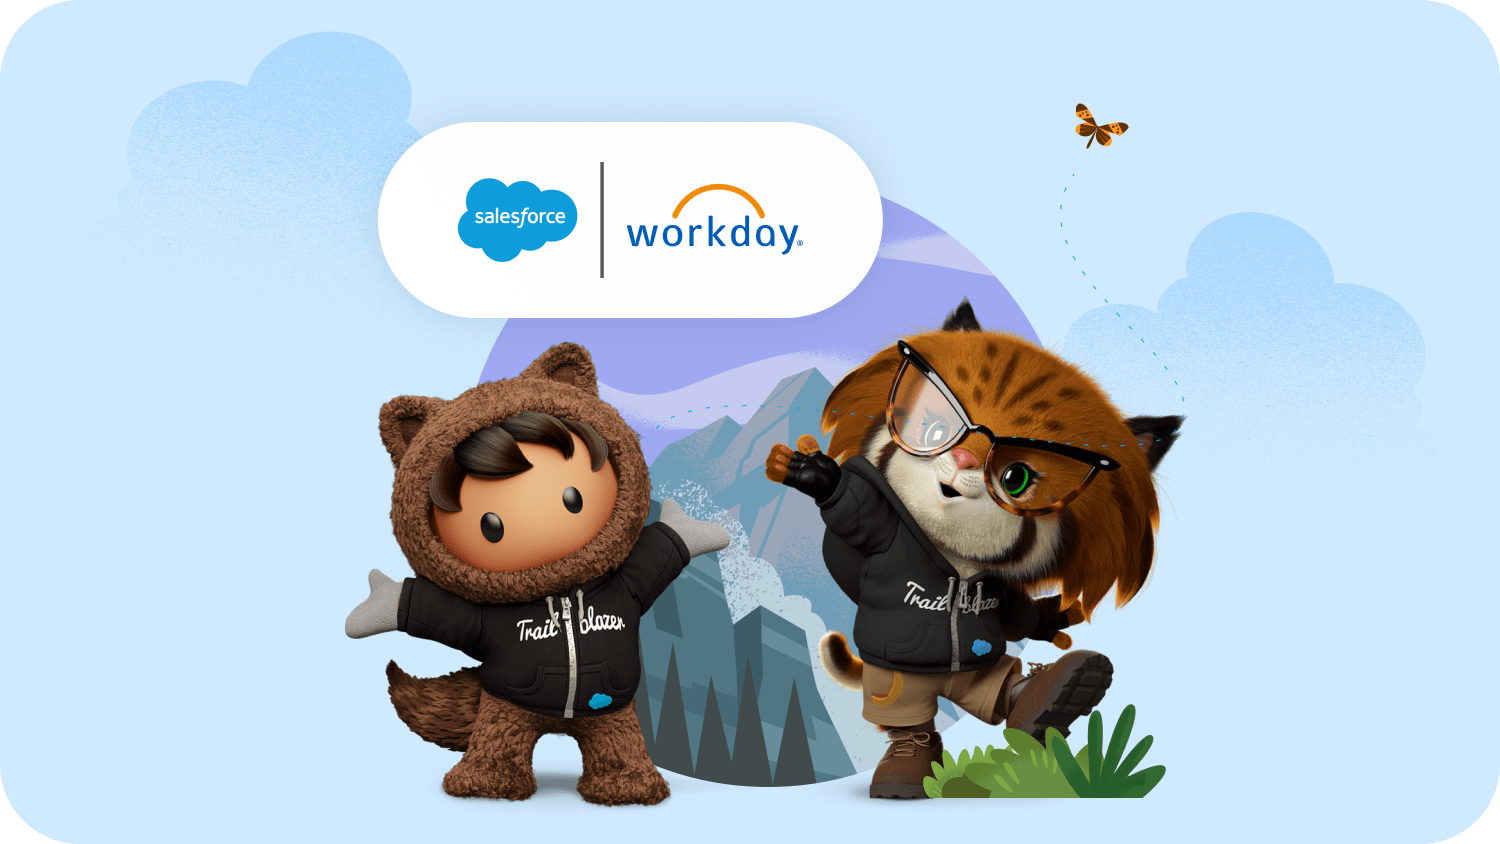 An illustration showing the partnership between Salesforce and Workday with two Salesforce characters in front of a nature scene.